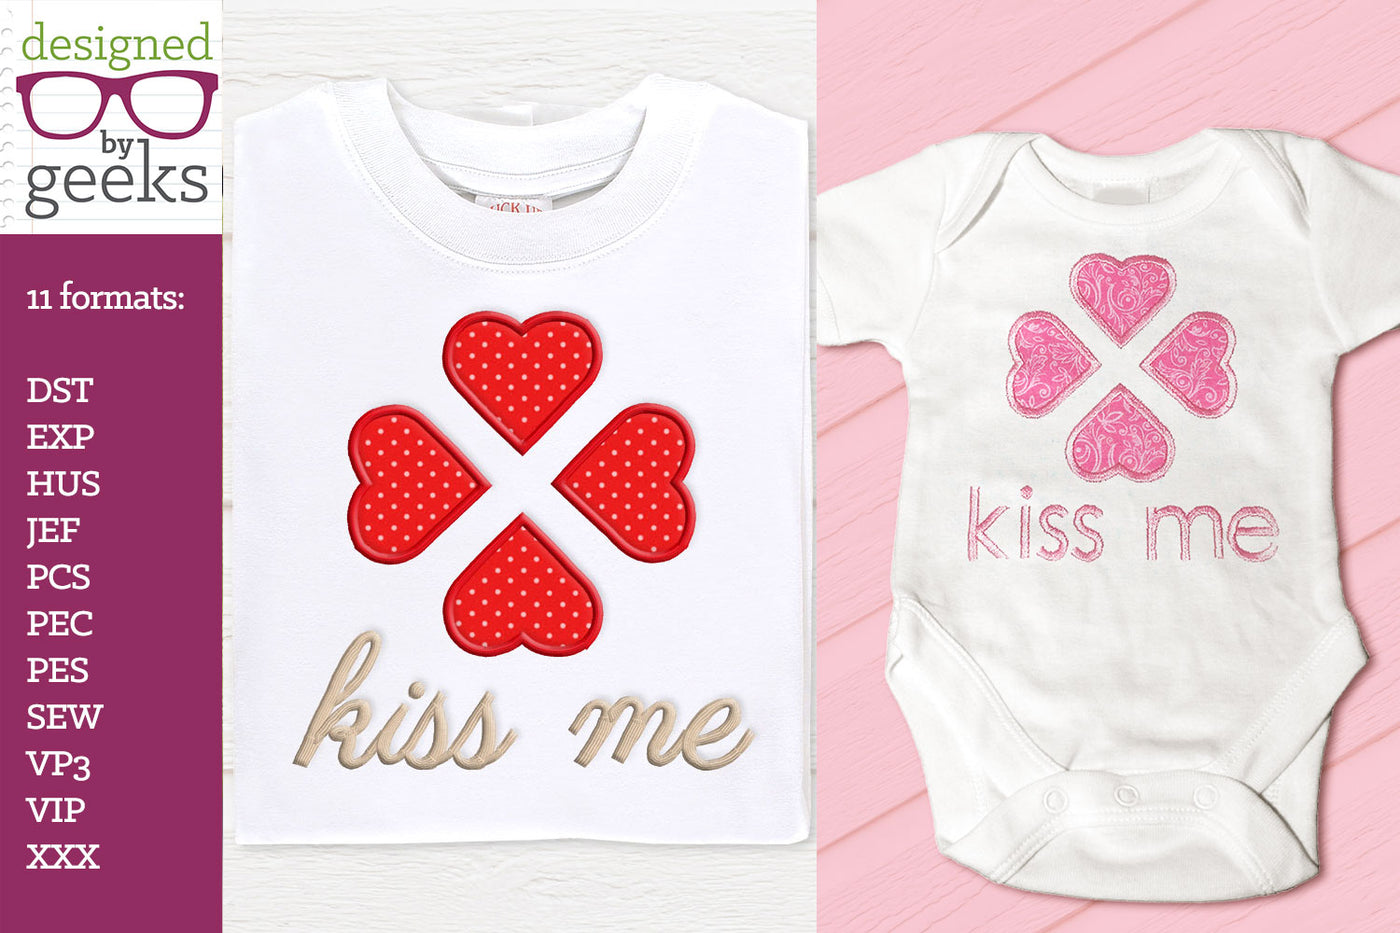 Kiss me applique with 4 large hearts